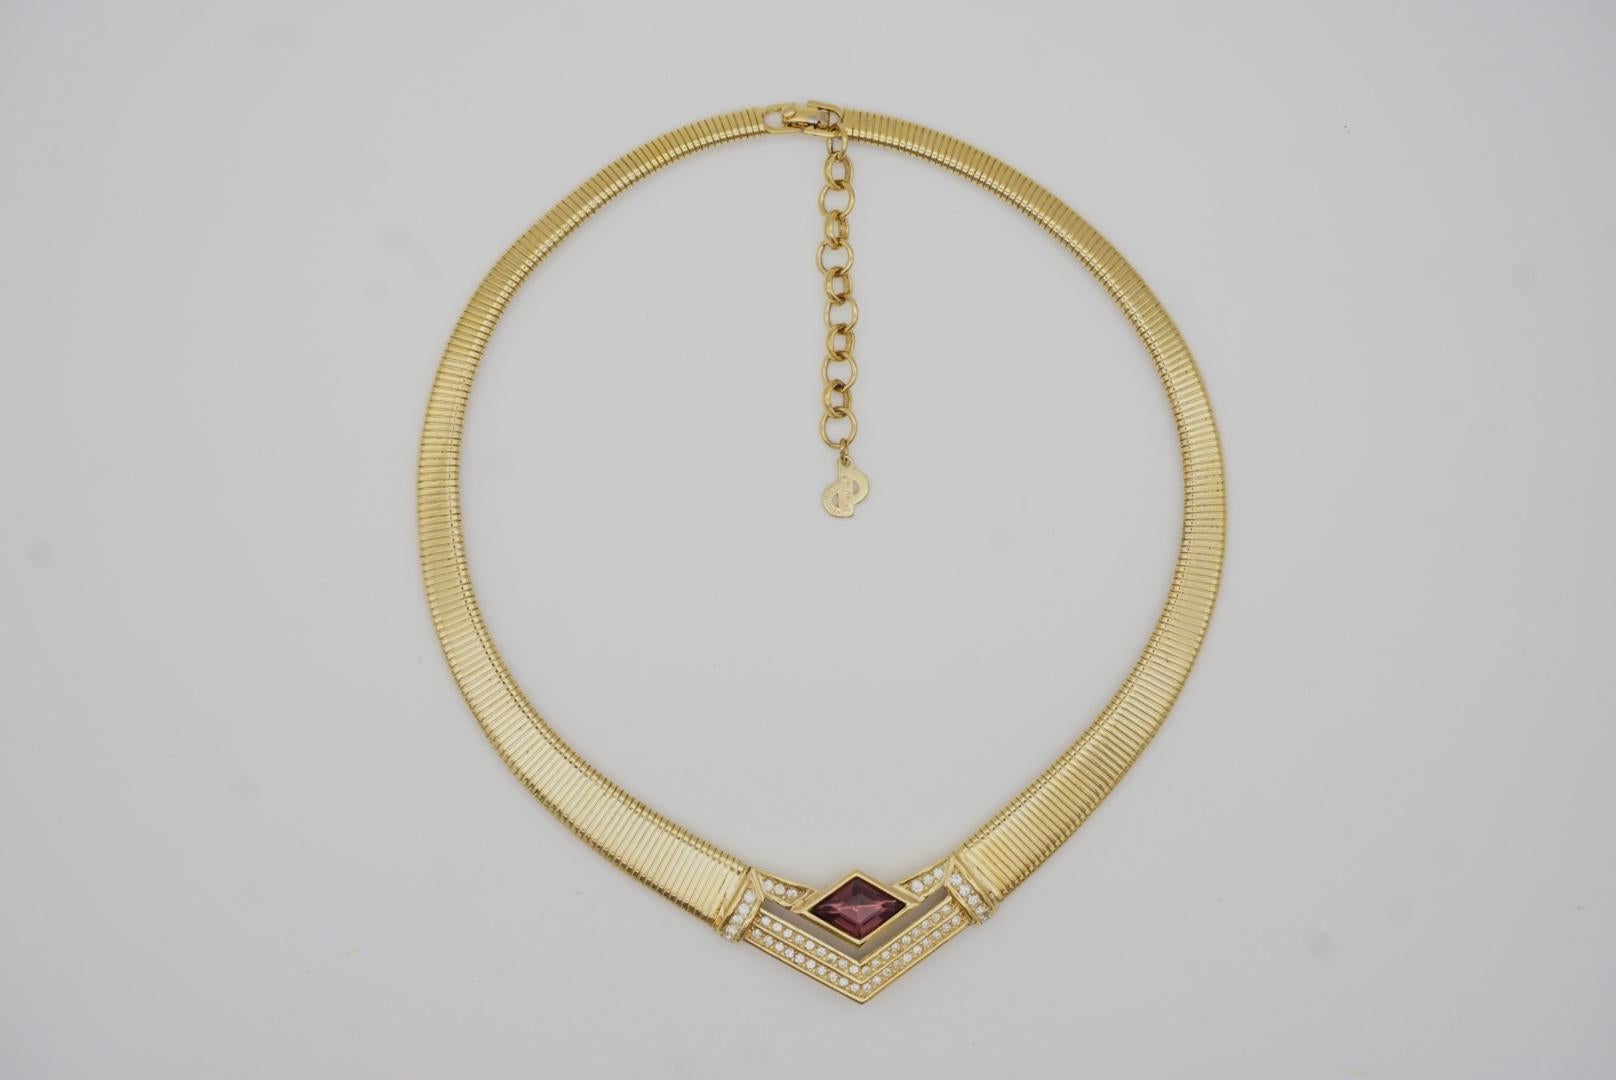 Christian Dior Vintage 1980s Ribbed Amethyst Crystals Triangle Choker Necklace For Sale 3